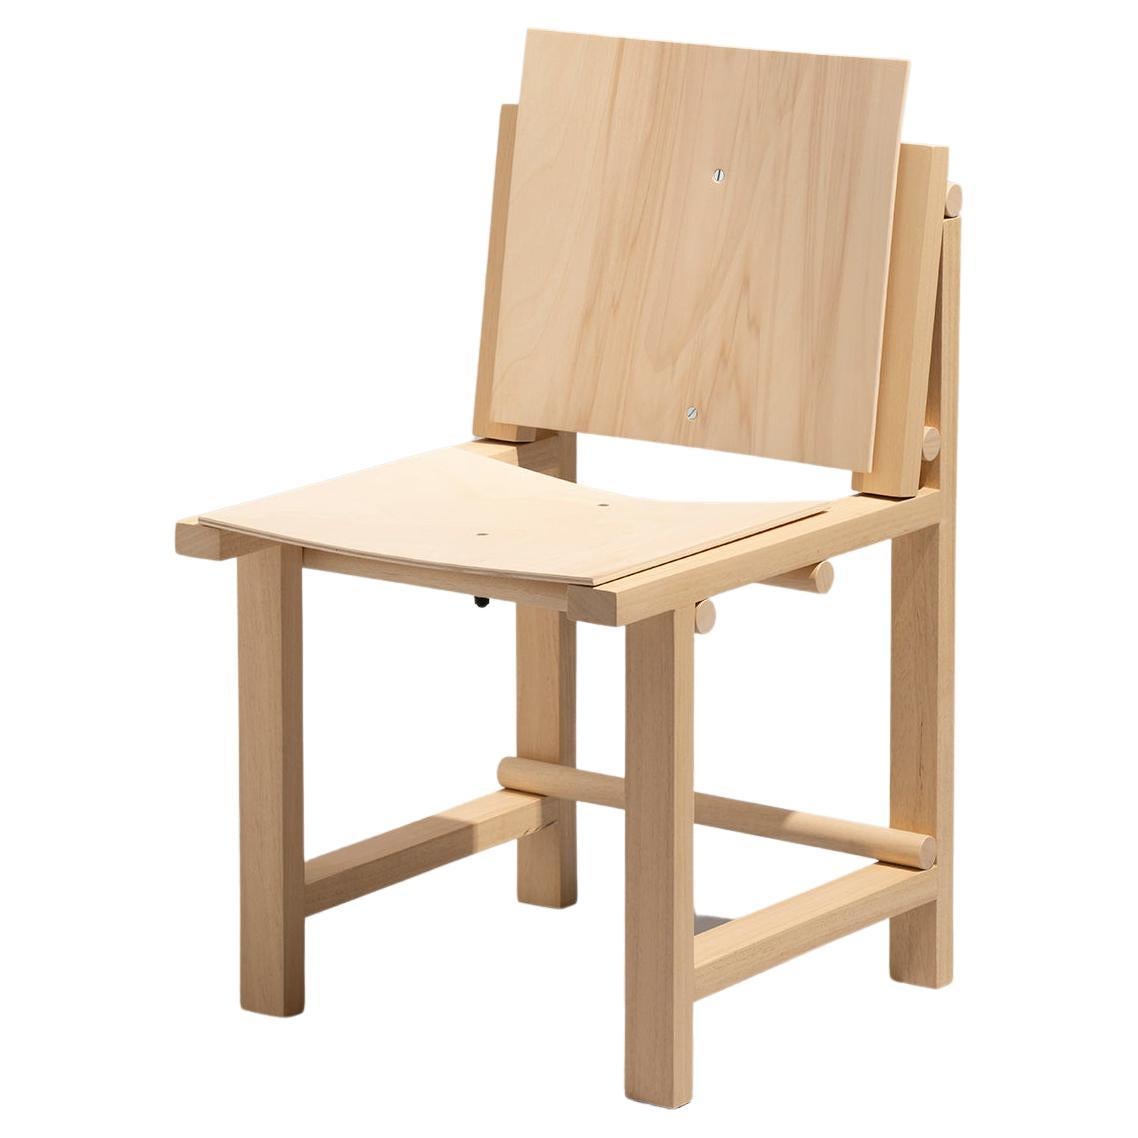 Can I make furniture with plywood?